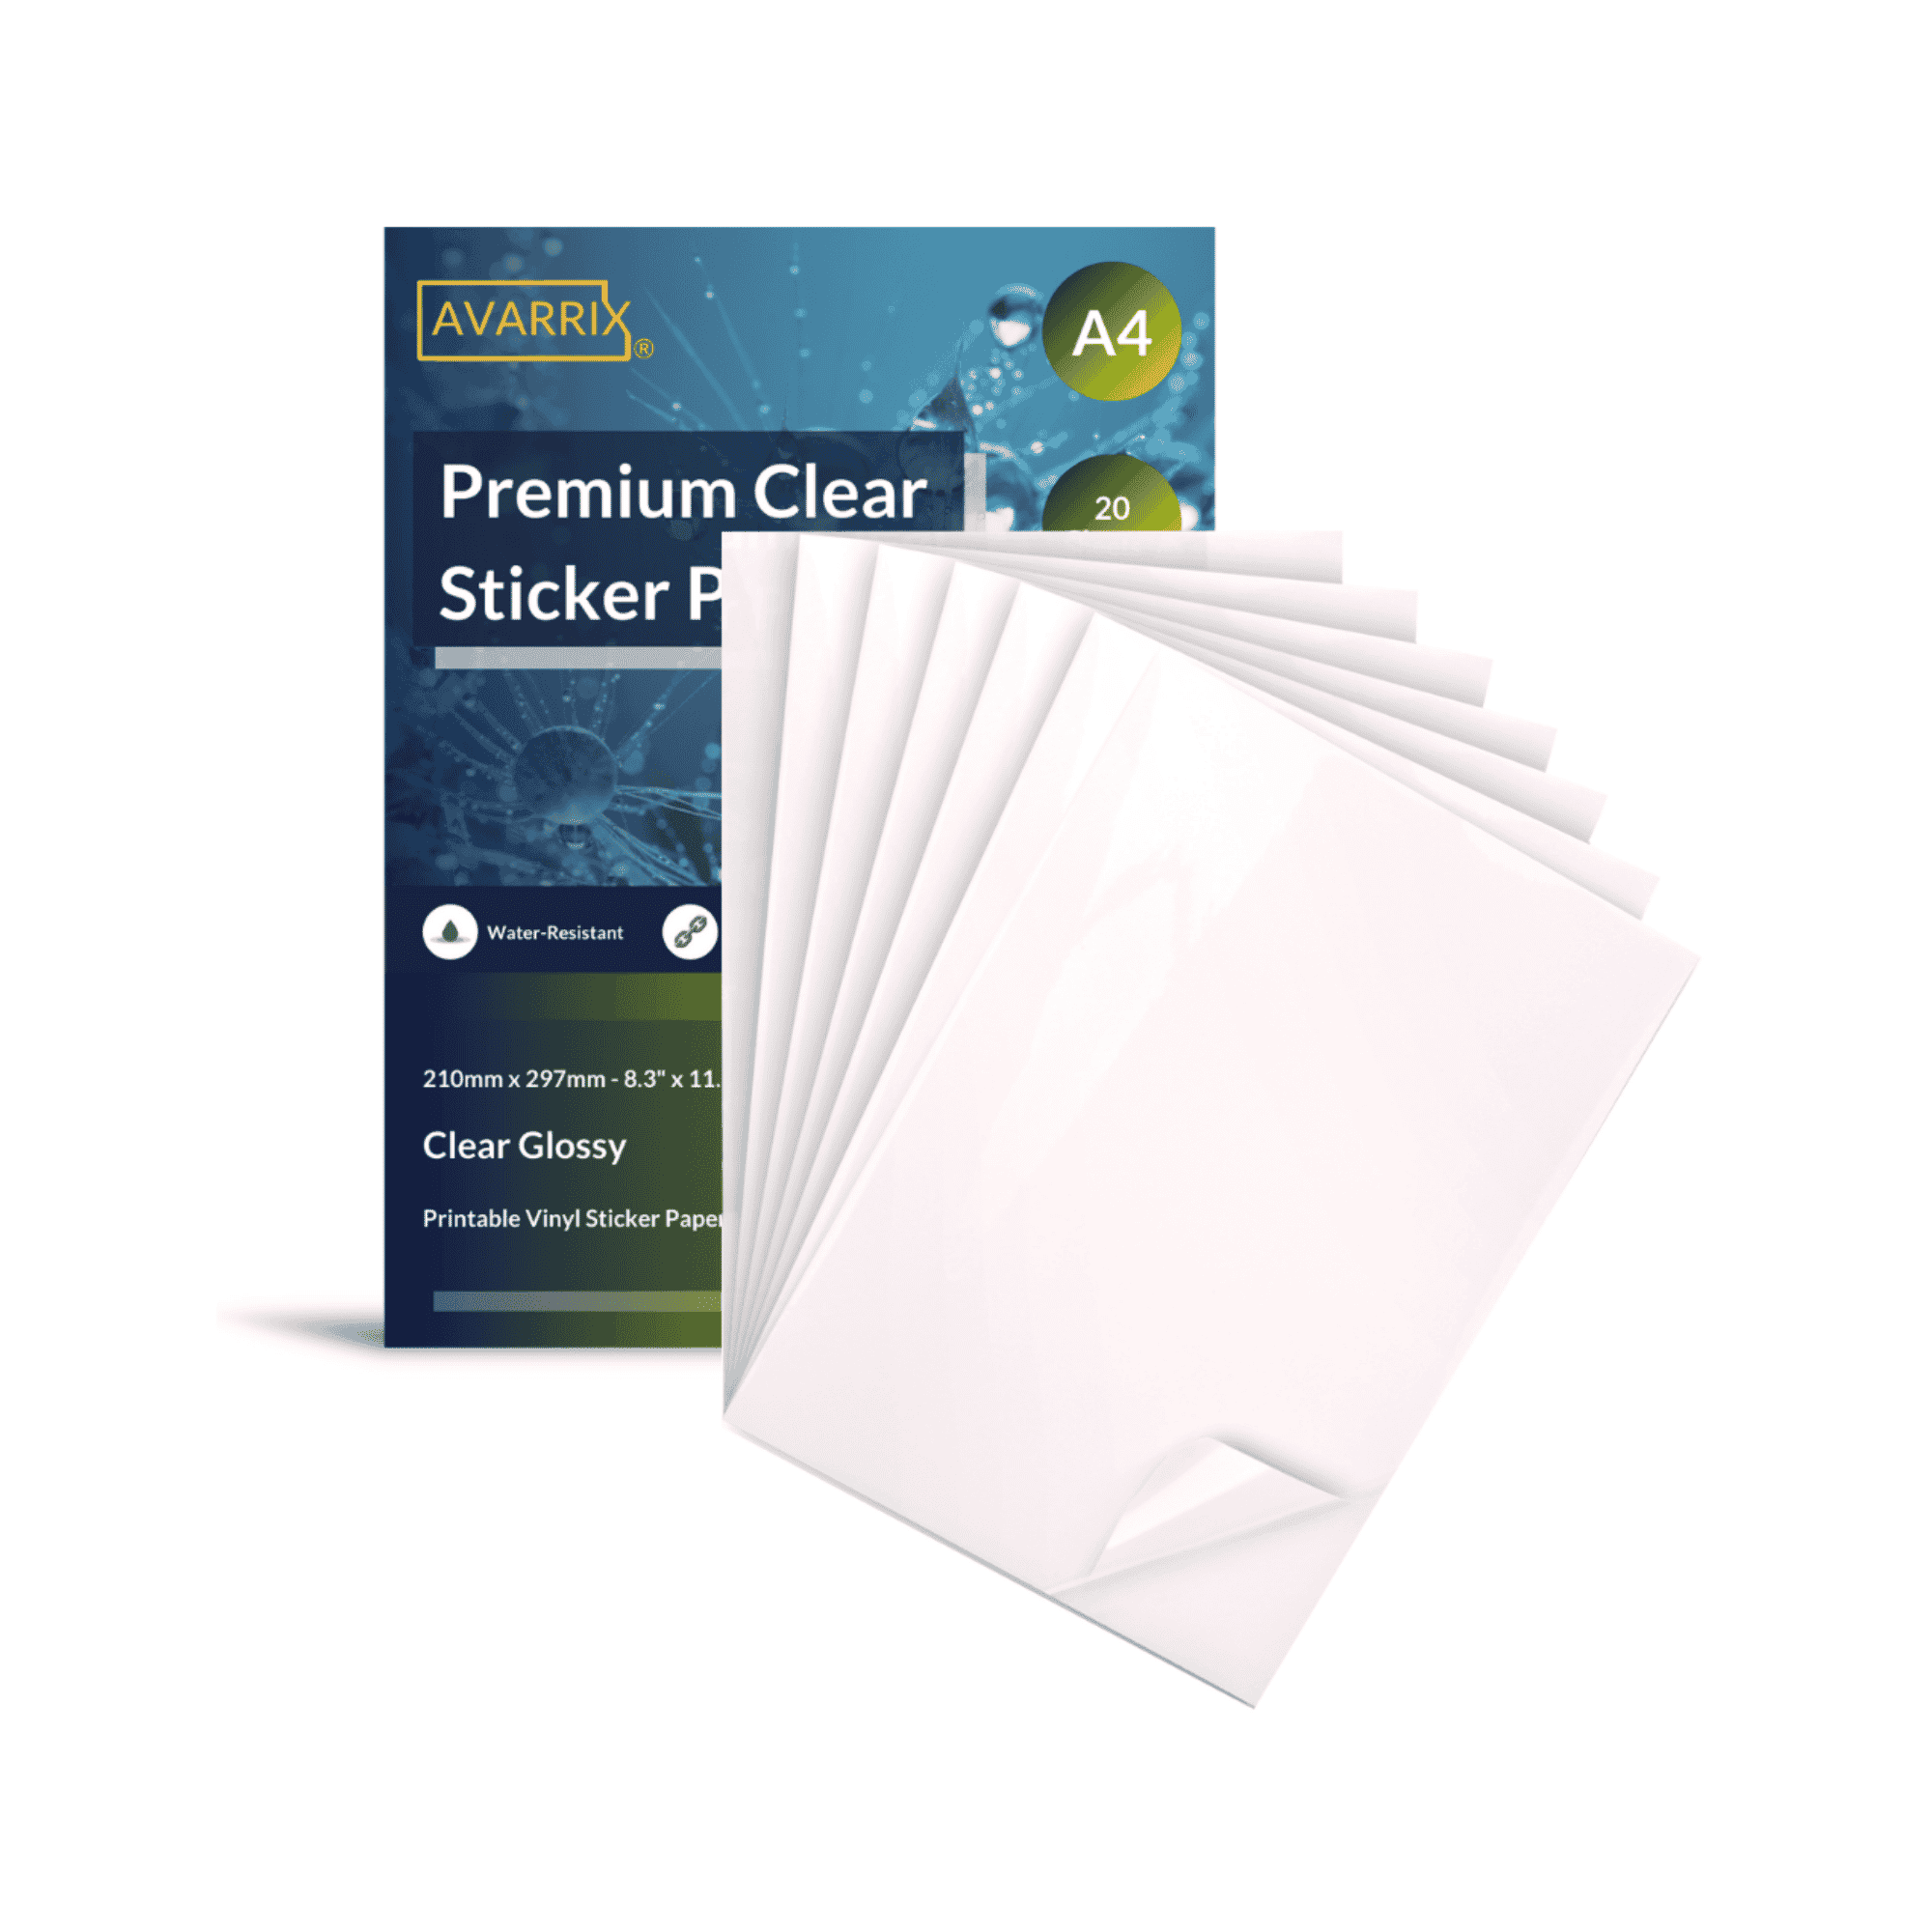 30 Sheets Printable Vinyl Sticker Paper A4 Transparent Glossy